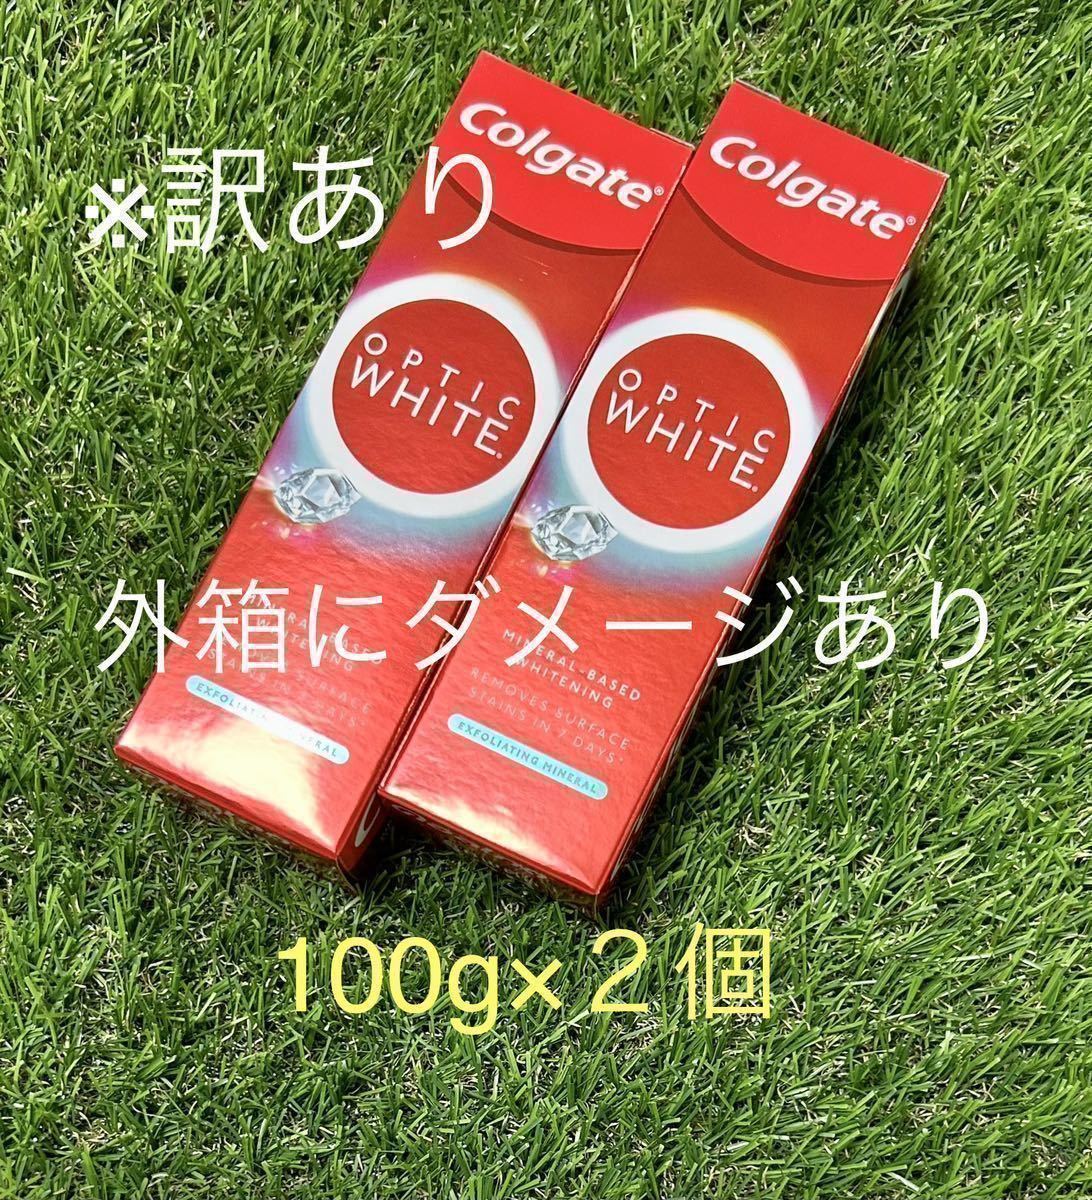 * with translation outer box . damage equipped 2 piece new package koru gate Colgate plus car in Opti k white tooth paste 